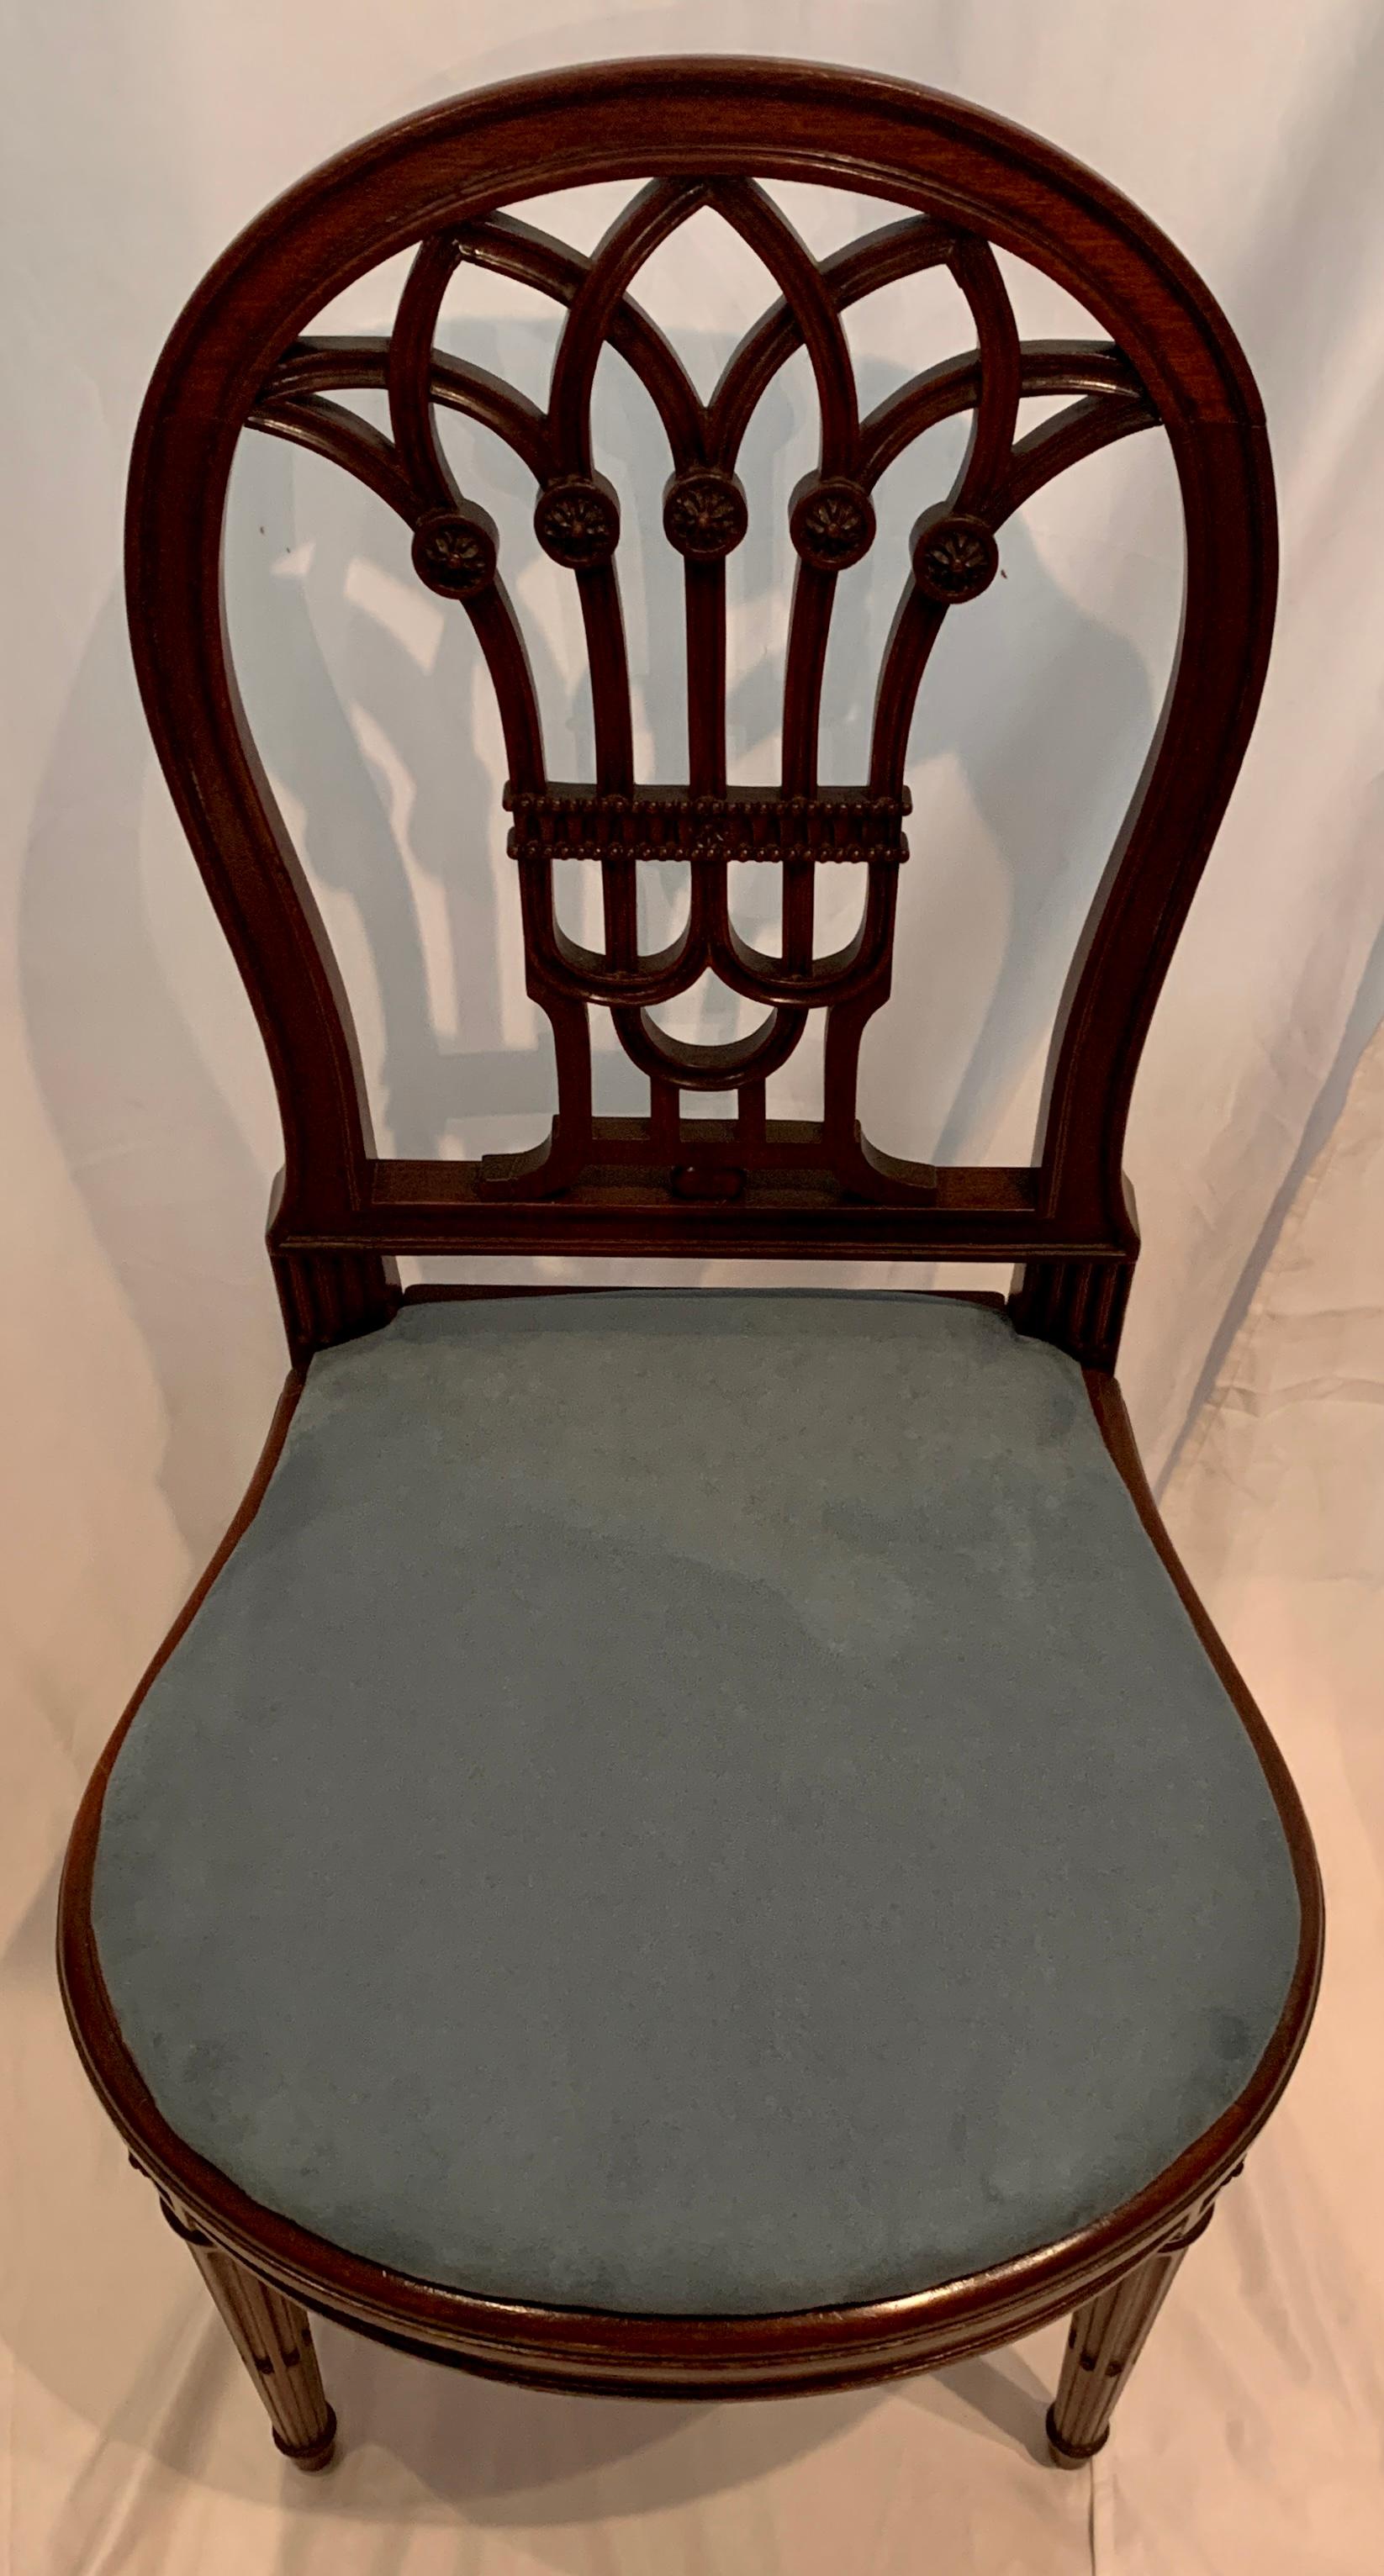 Set of 6 antique English Mahogany & cane dining chairs with newly upholstered blue seat cushions, Circa 1890.